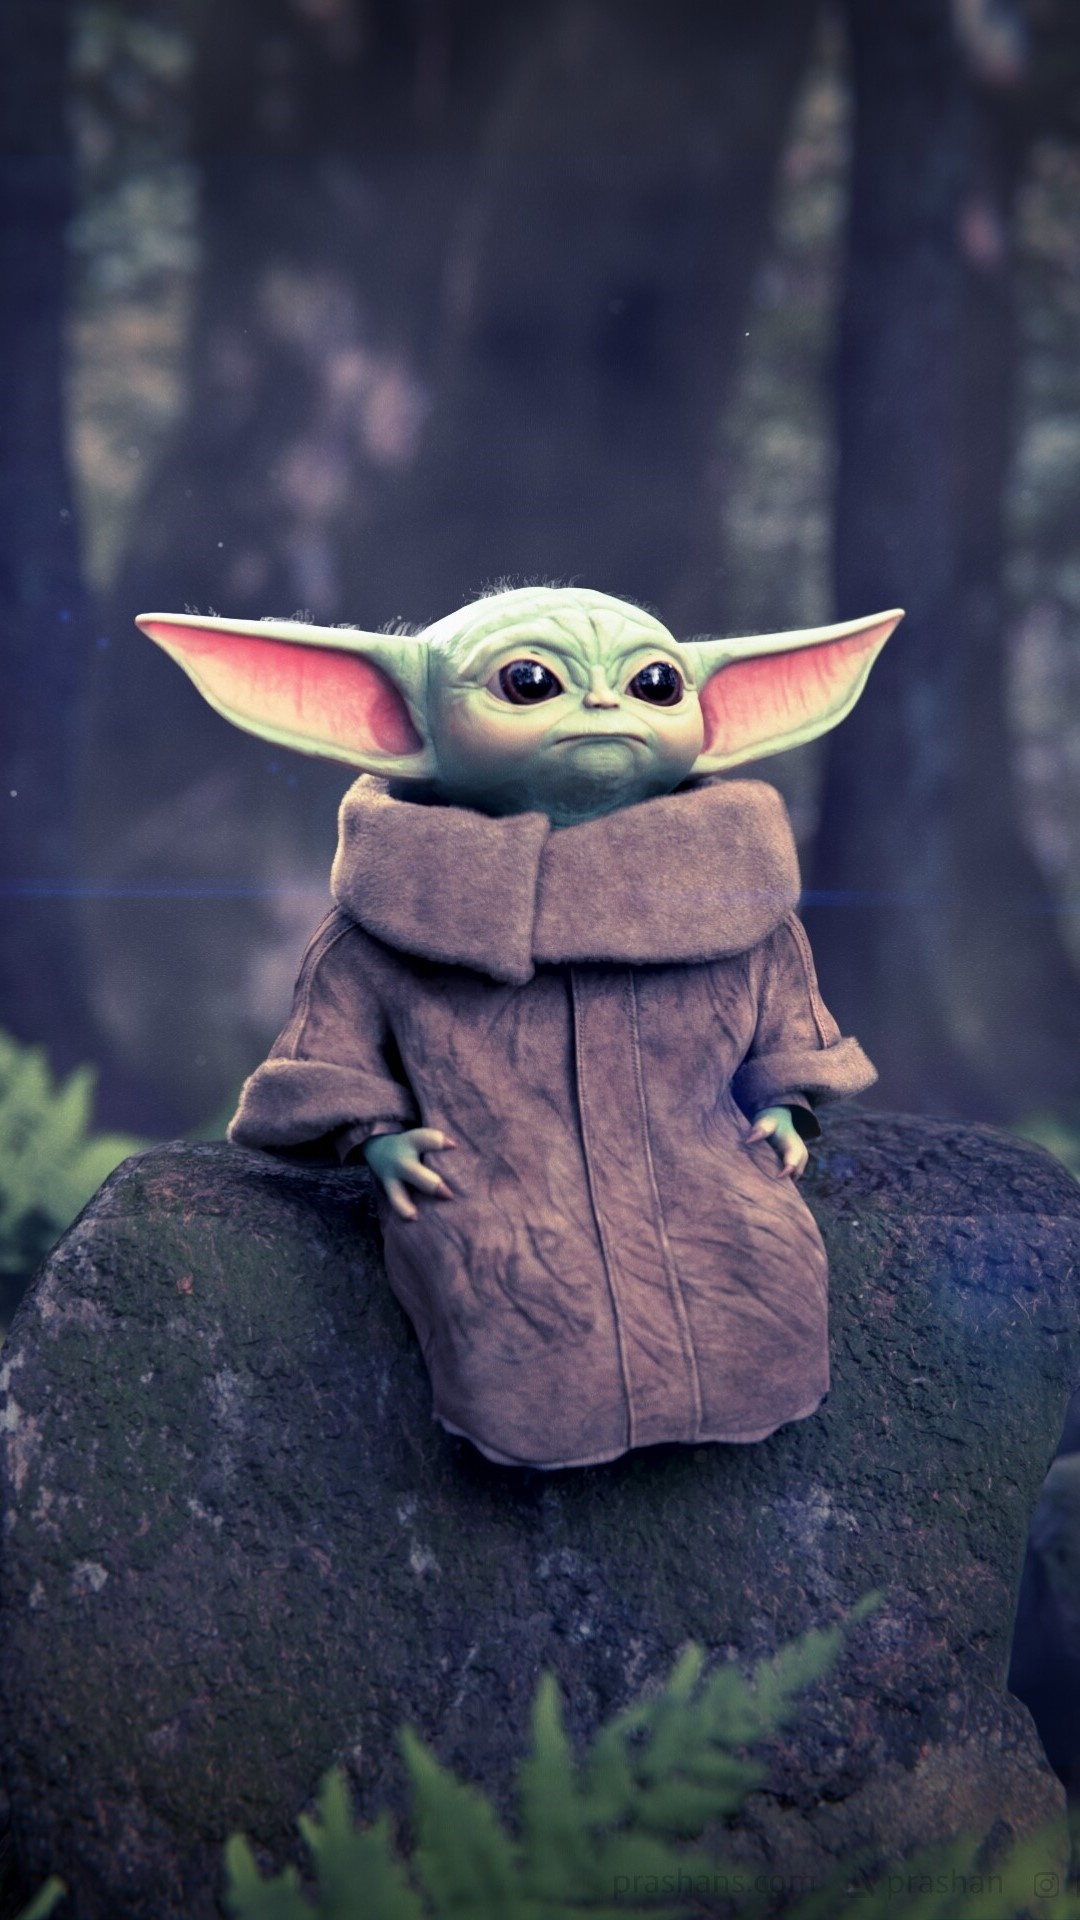 Baby Yoda iPhone wallpaper, Personalized phone background, Film character, Star Wars fan, 1080x1920 Full HD Handy